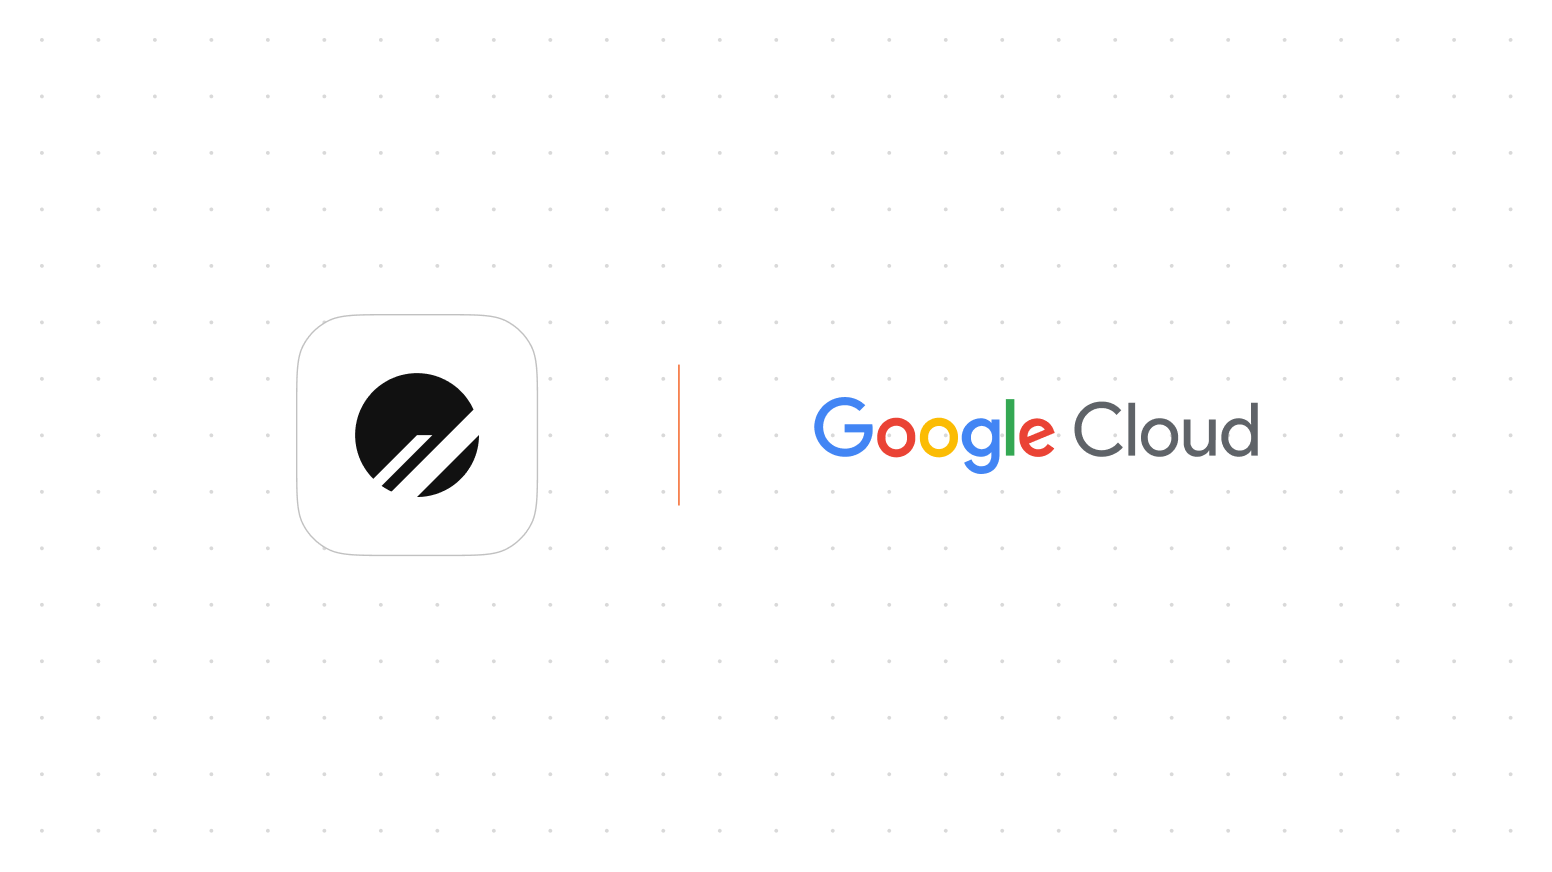 PlanetScale is now available on the Google Cloud Marketplace